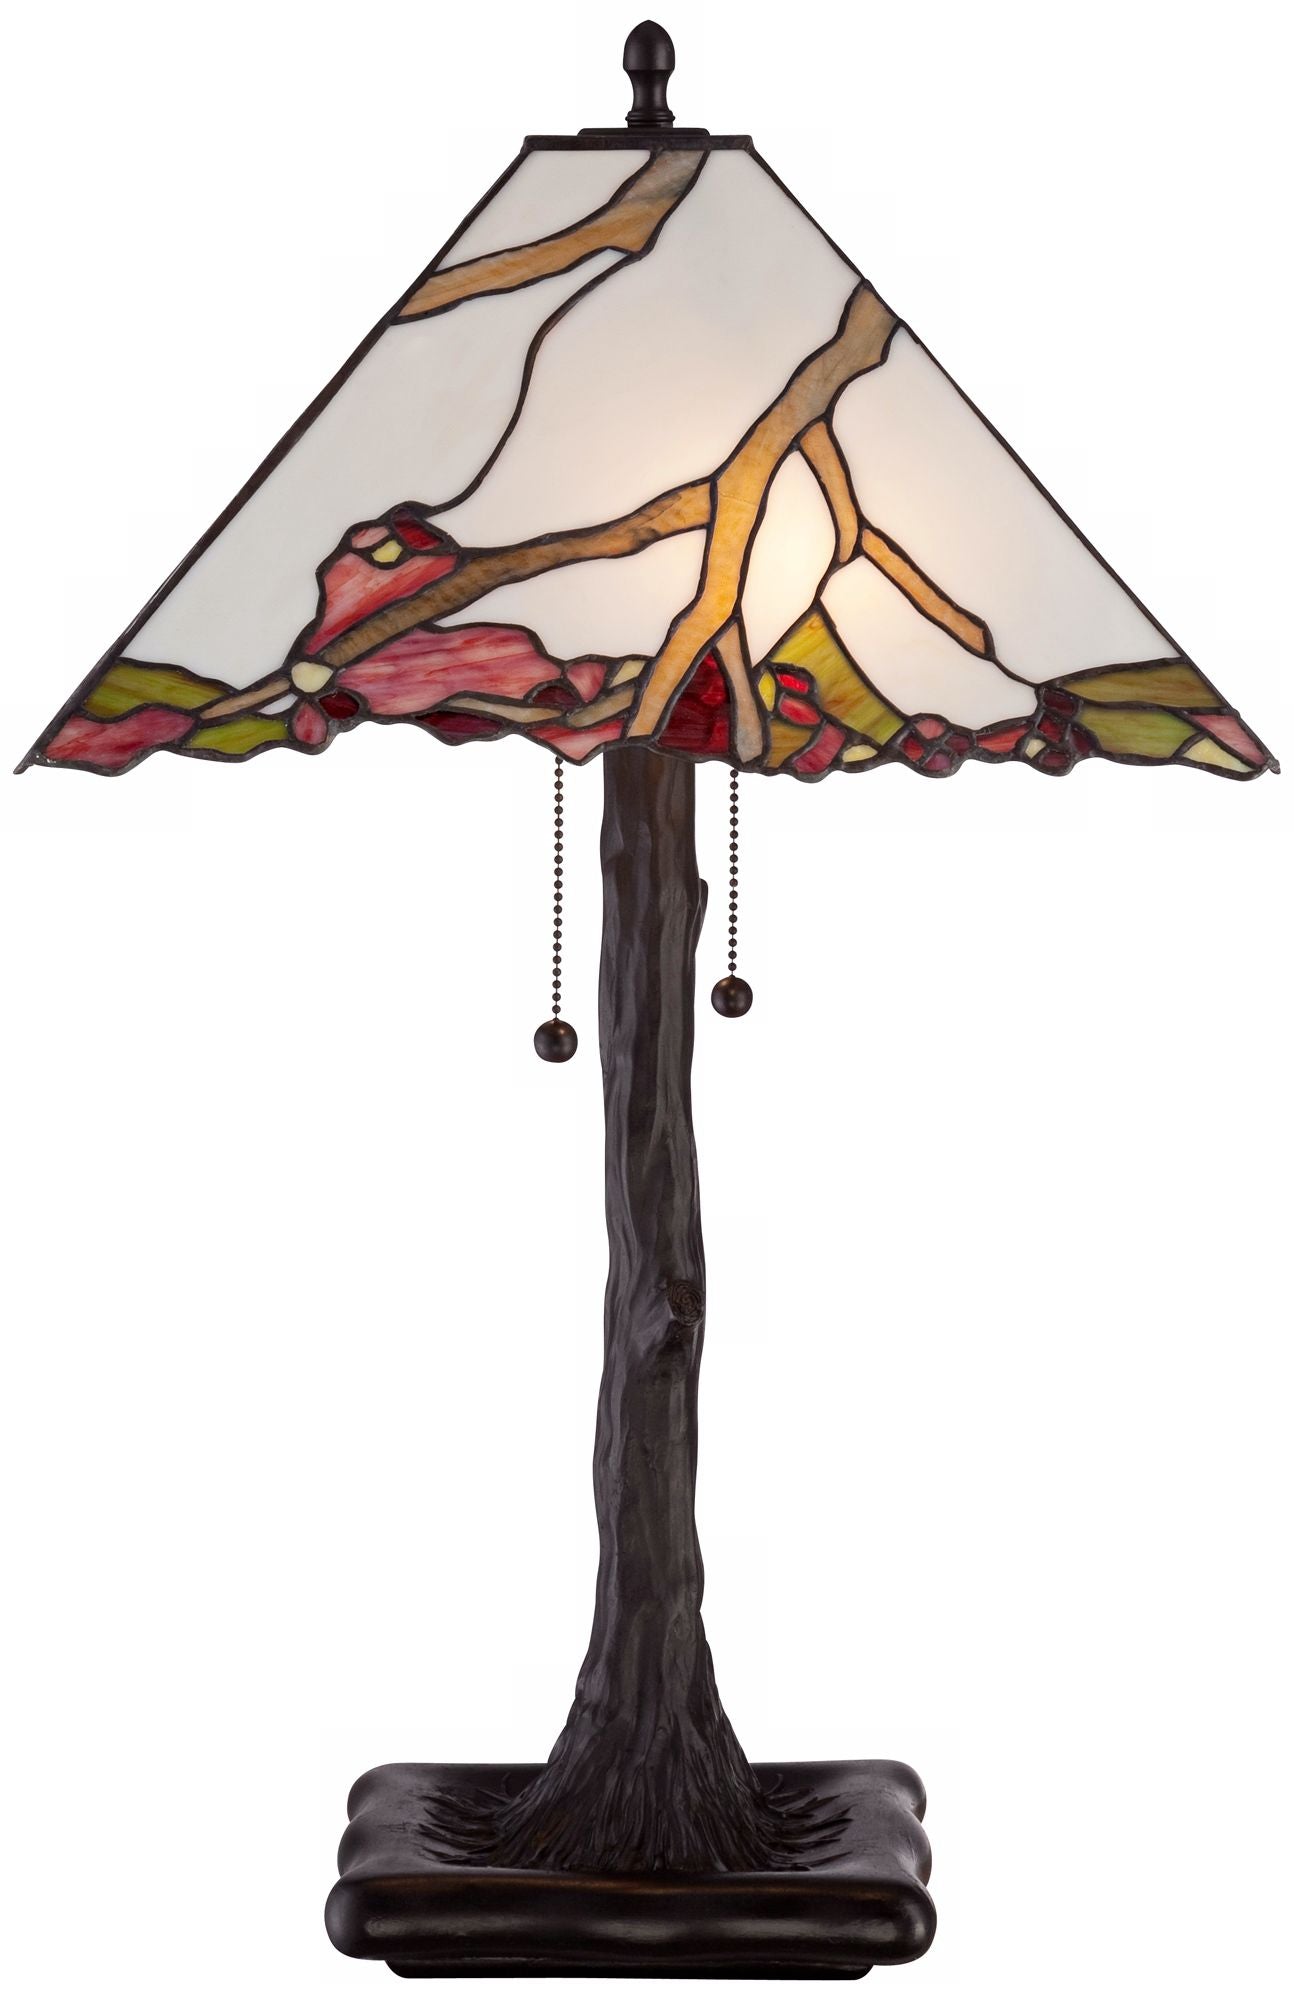 Robert Louis  Table Lamp 26" High Dark Bronze Cherry Blossom Stained Glass Shade for Living Room Family Bedroom Bedside Nightstand